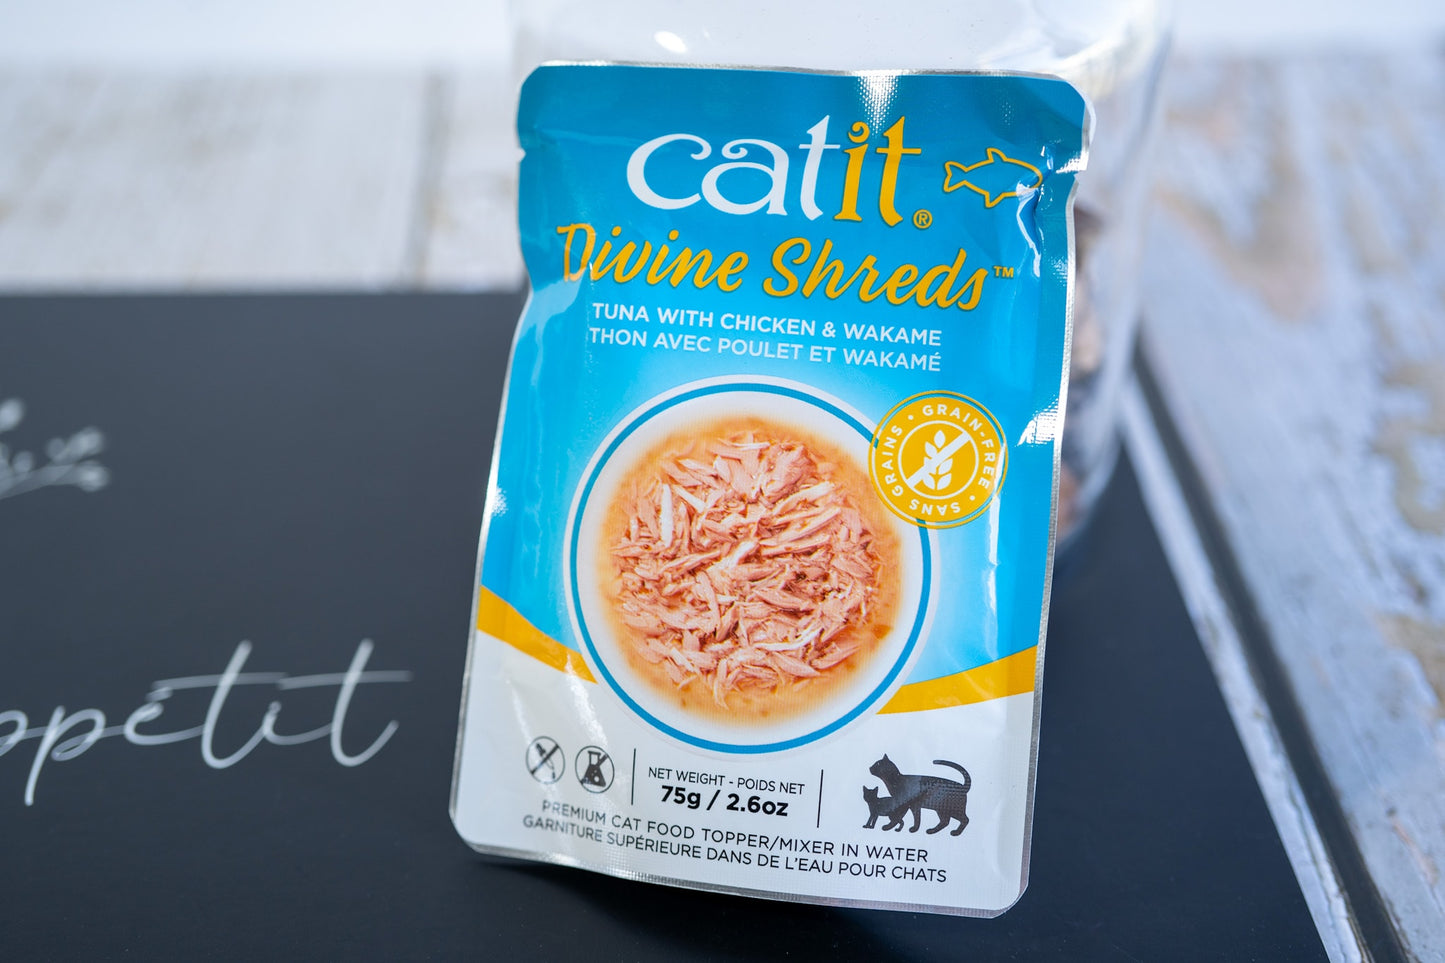 Premium cat food topping in water with tuna, chicken and wakame flavor.